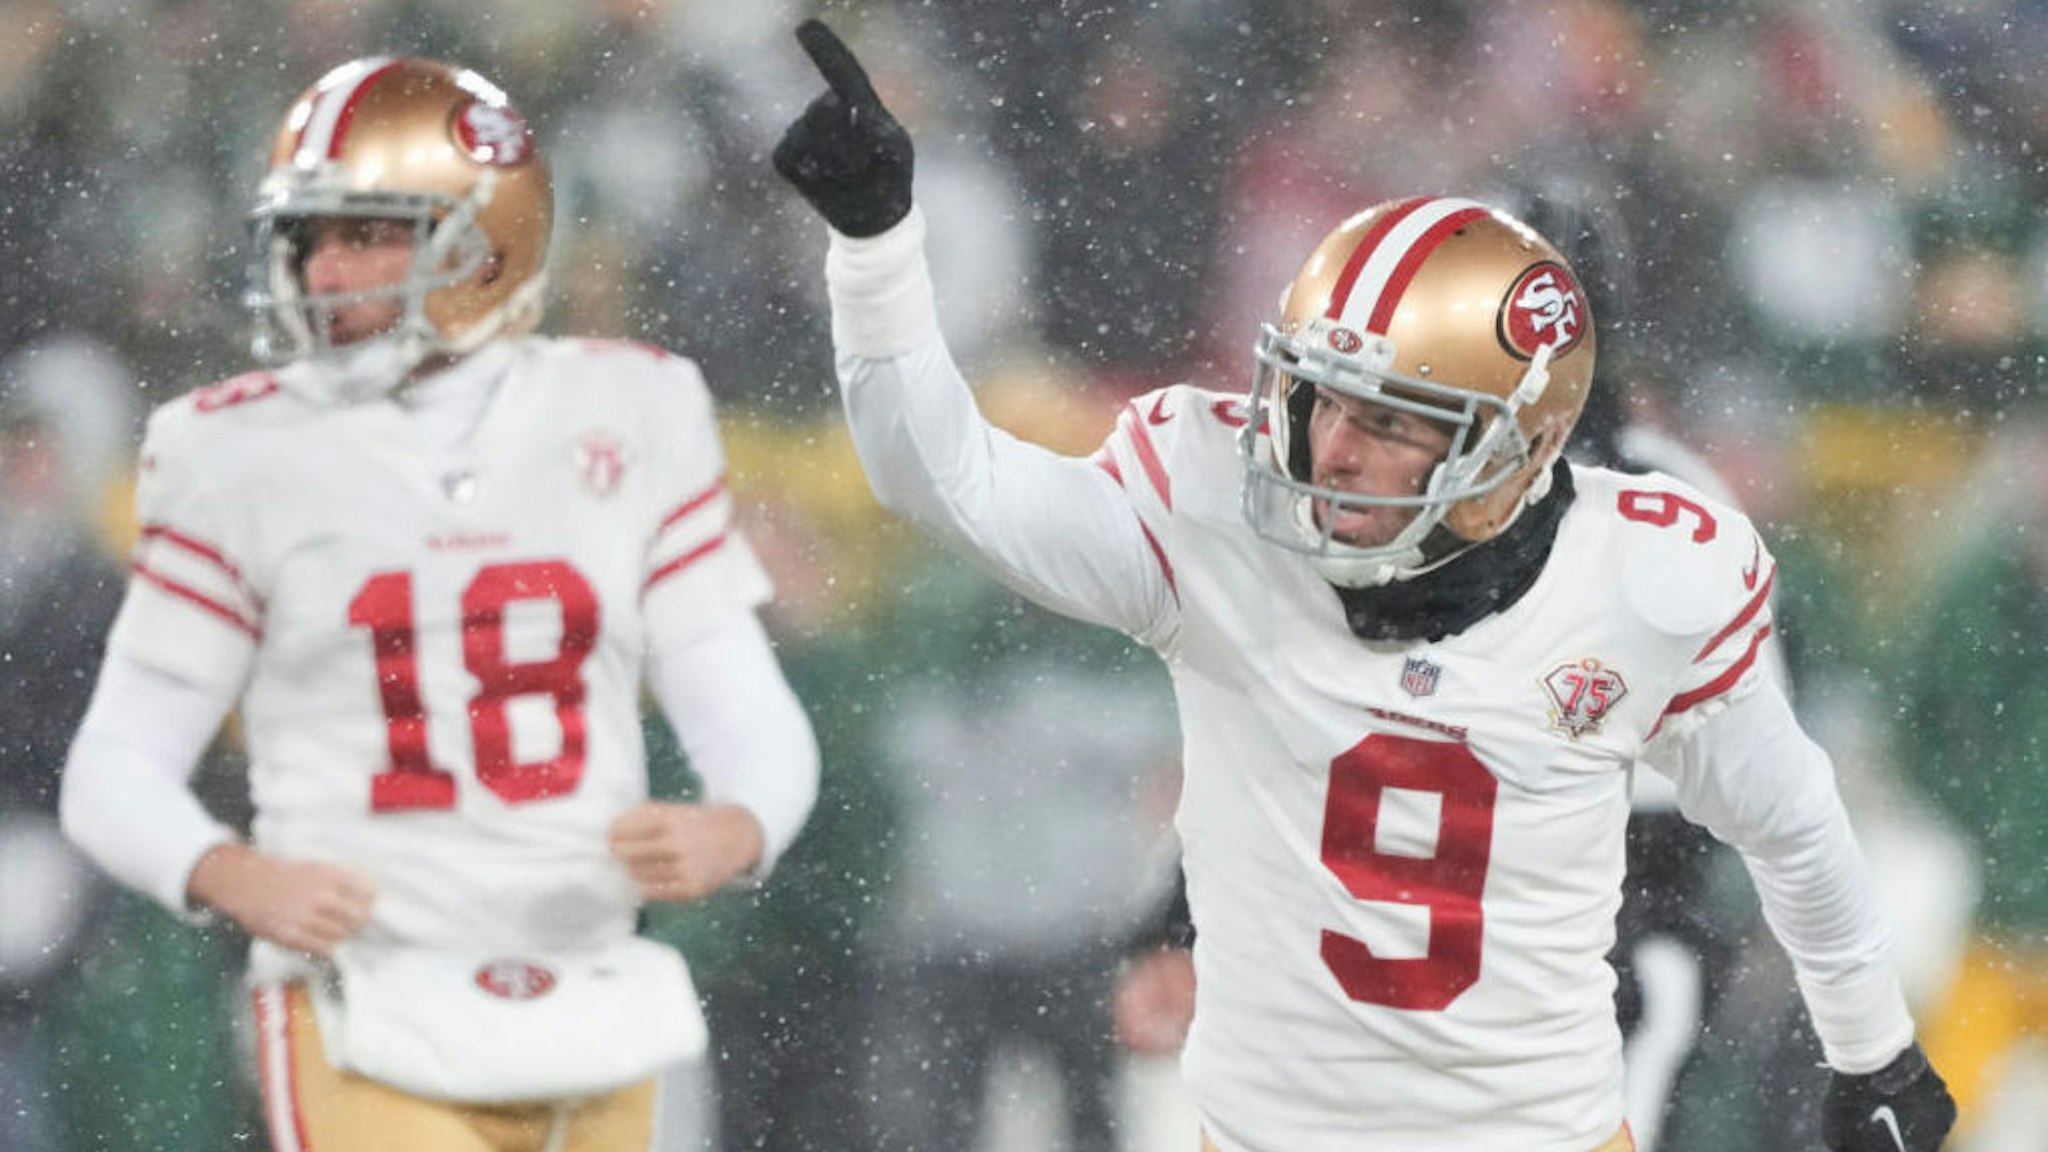 GREEN BAY, WISCONSIN - JANUARY 22: Kicker Robbie Gould #9 of the San Francisco 49ers reacts as he kicks the game-winning filed goal to win the NFC Divisional Playoff game against the Green Bay Packers at Lambeau Field on January 22, 2022 in Green Bay, Wisconsin. (Photo by Patrick McDermott/Getty Images)